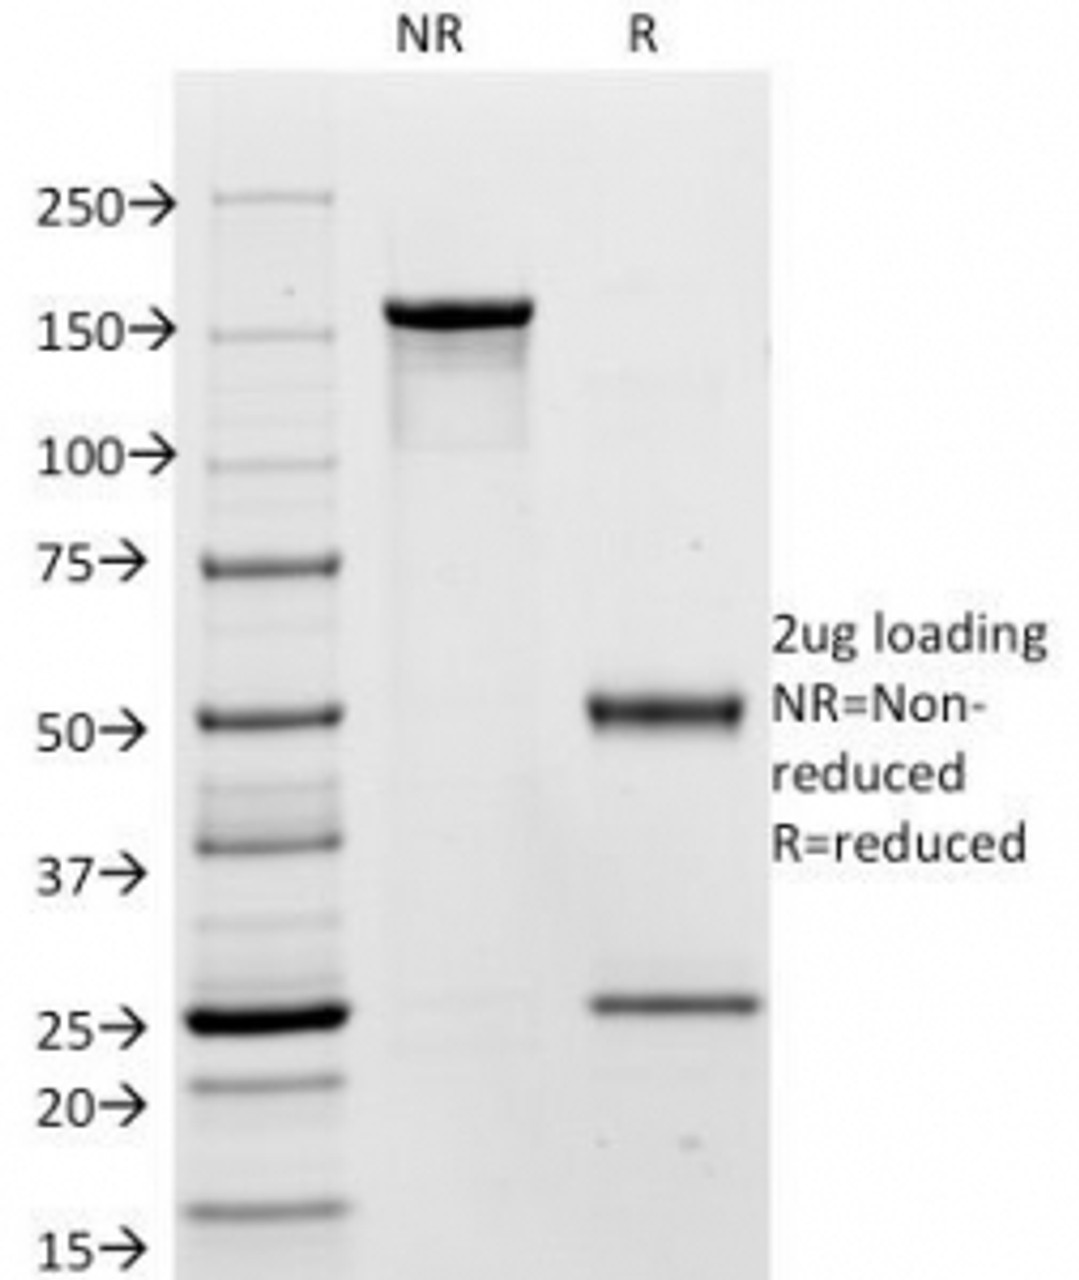 SDS-PAGE Analysis of Purified, BSA-Free CEA Antibody (clone C66/195) . Confirmation of Integrity and Purity of the Antibody.